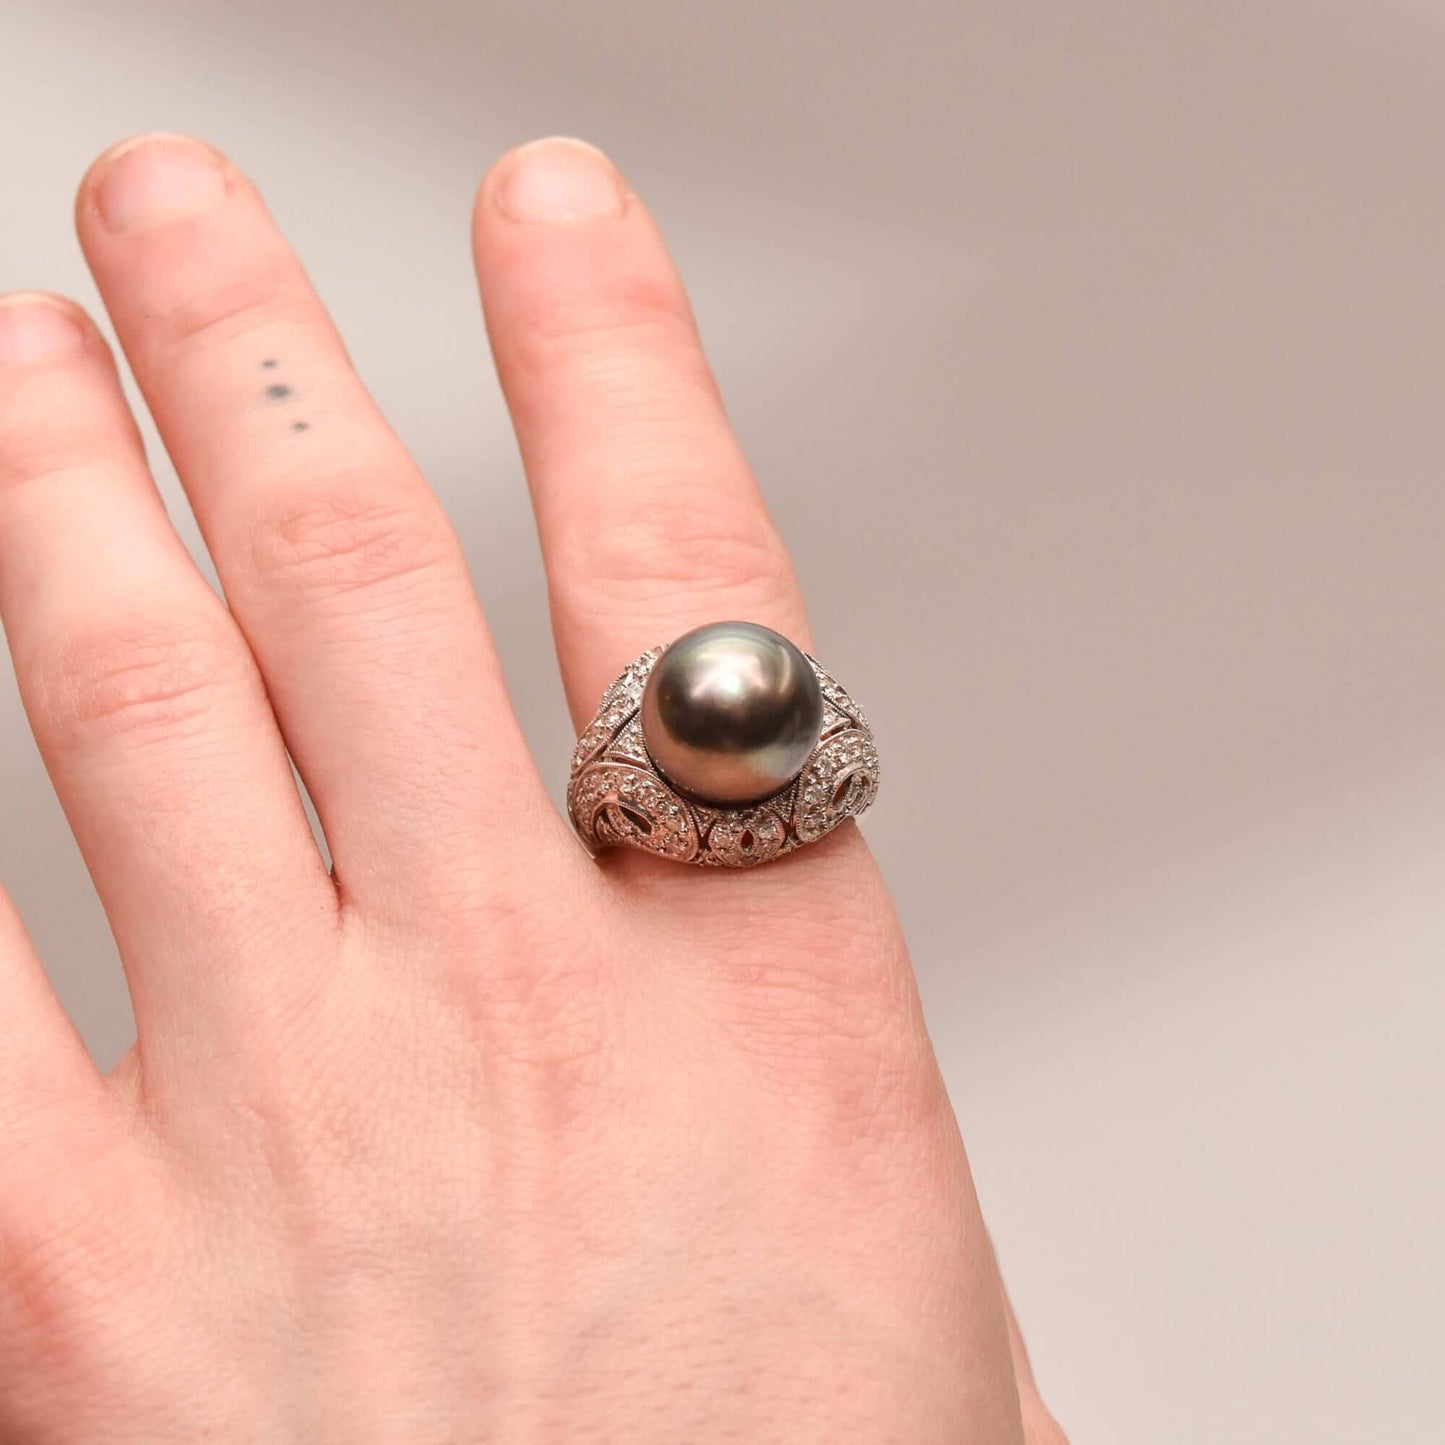 18K Diamond Pave Tahitian Pearl Bombe Ring In White Gold, Estate Jewelry, Size 10 US